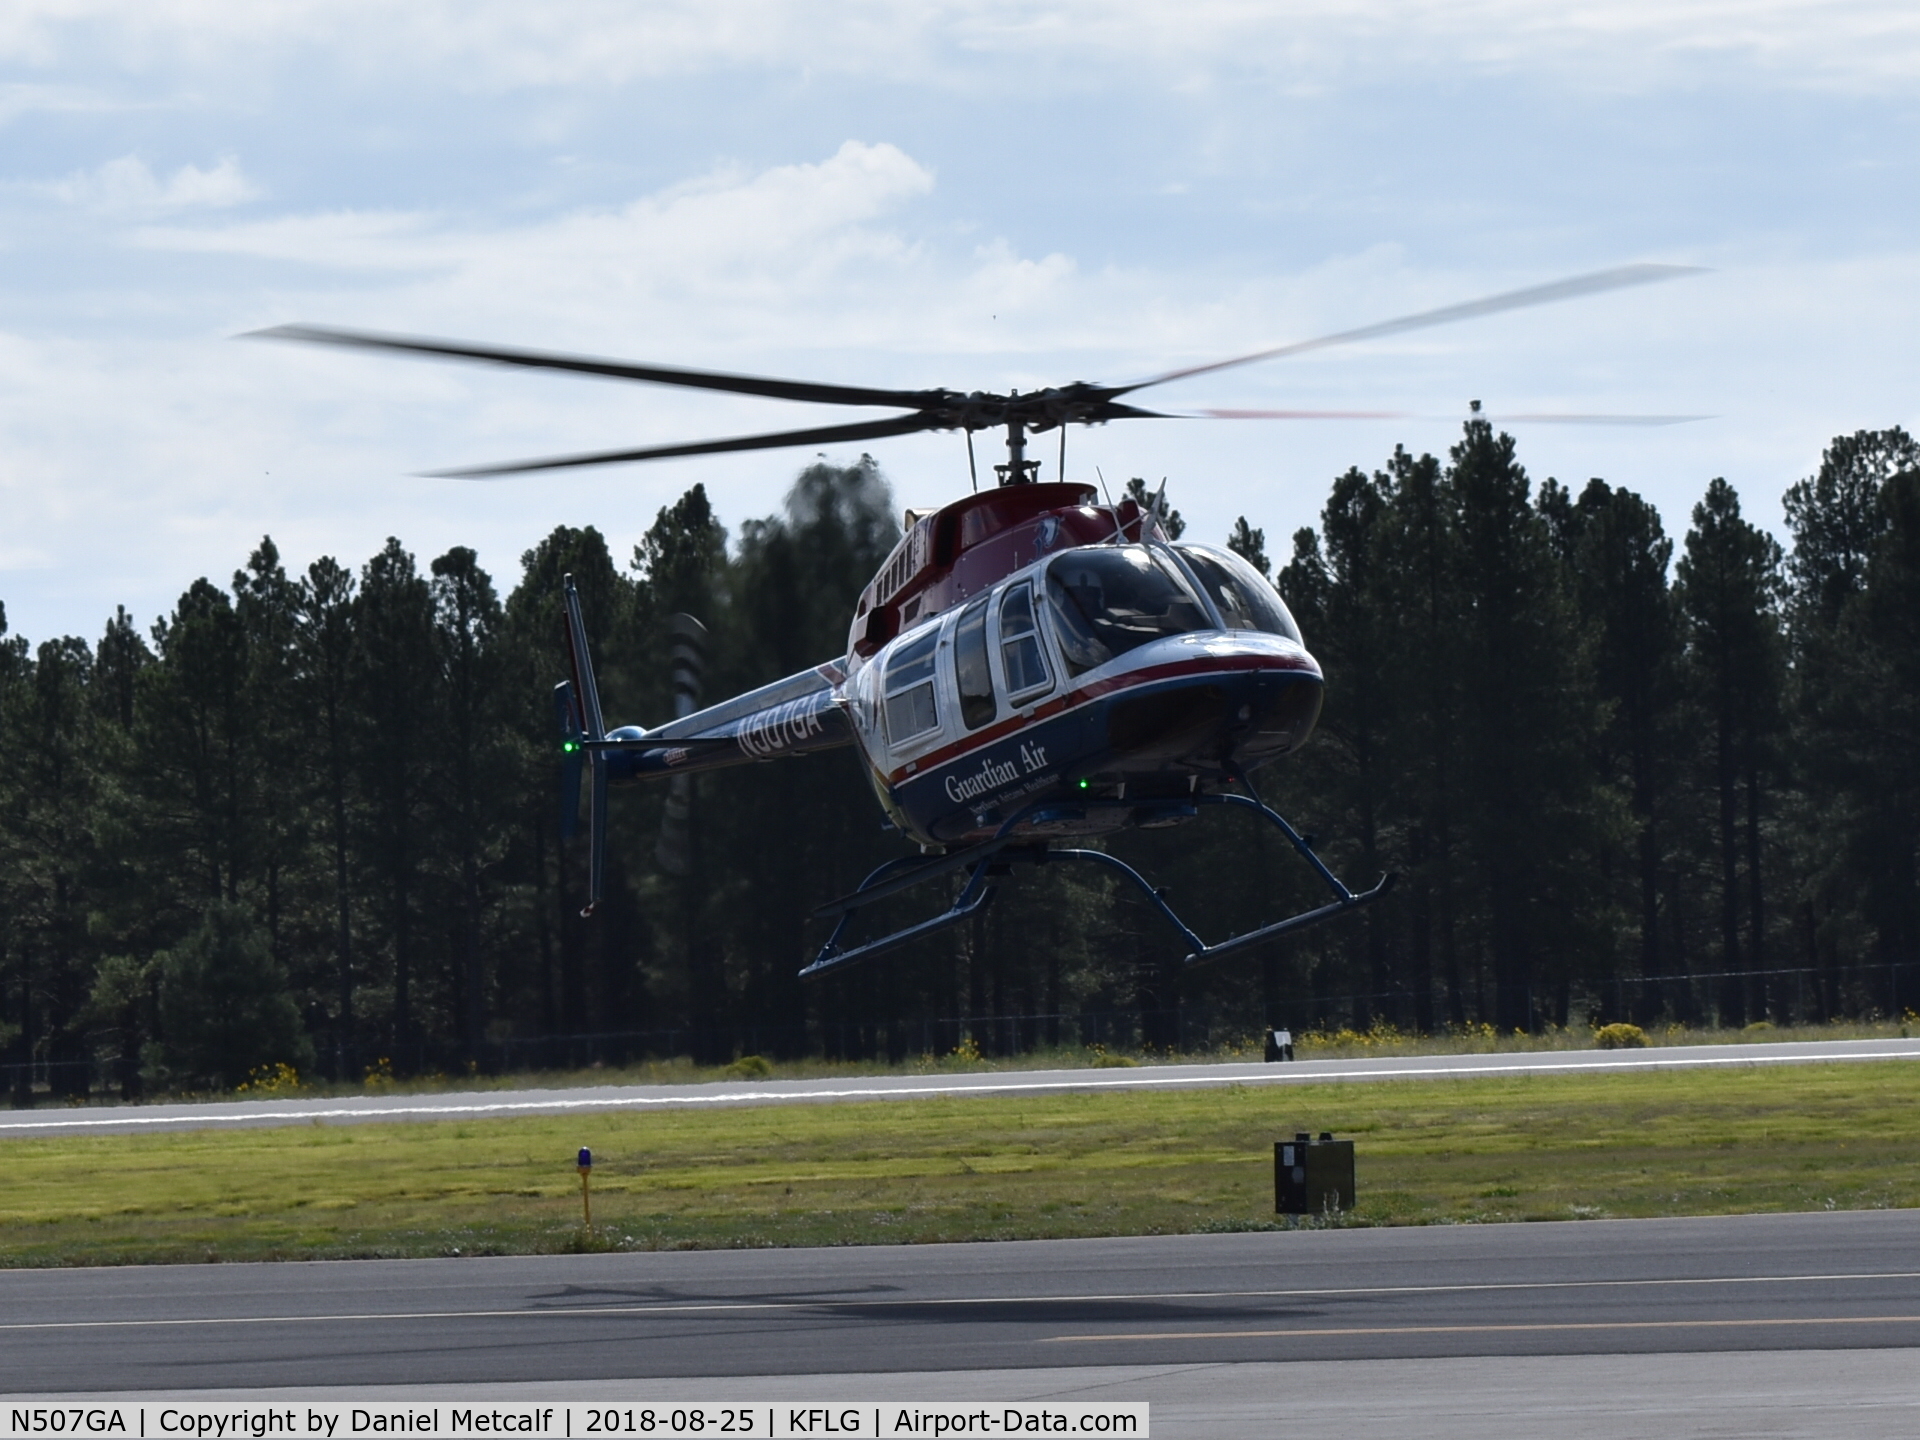 N507GA, 2013 Bell 407 C/N 54466, Seen landing at Flagstaff Pulliam Airport during Thunder over Flagstaff Airport Open House & Car Display